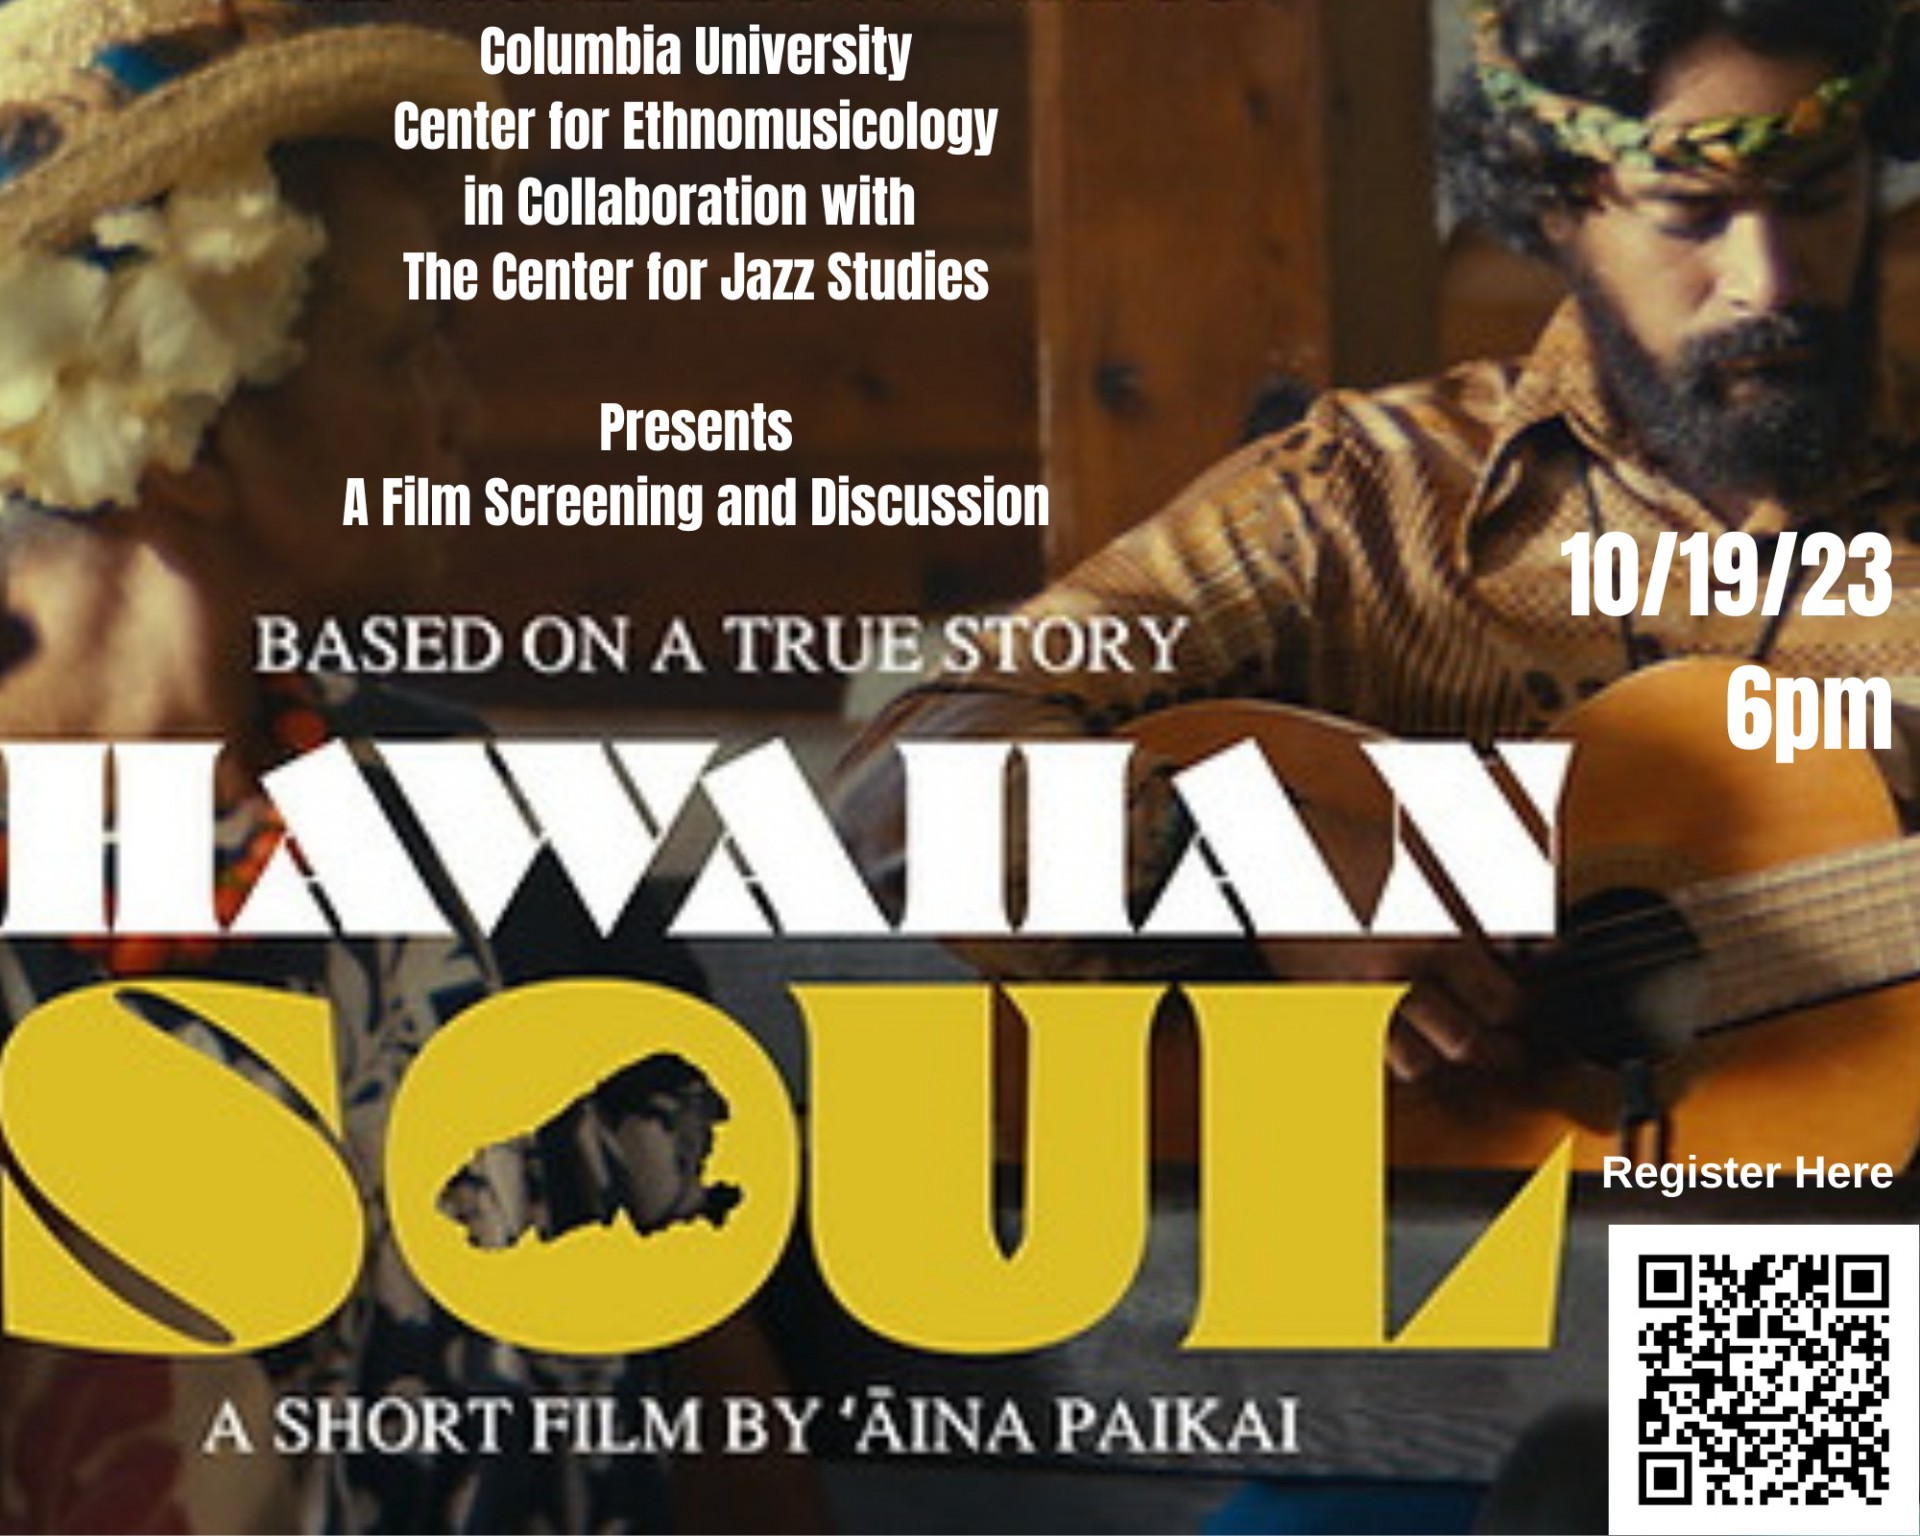 An image of George Helm with white text superimposed on it. The text reads "Columbia University Center for Ethnomusicology in Collaboration with The Center for Jazz Studies Presents A Film Screening and Discussion. 10/19/23 6pm. Based on a true story. Hawaiian Soul. A Short Film by ʻĀina Paikai." There is also a QR code that links to the registration page.